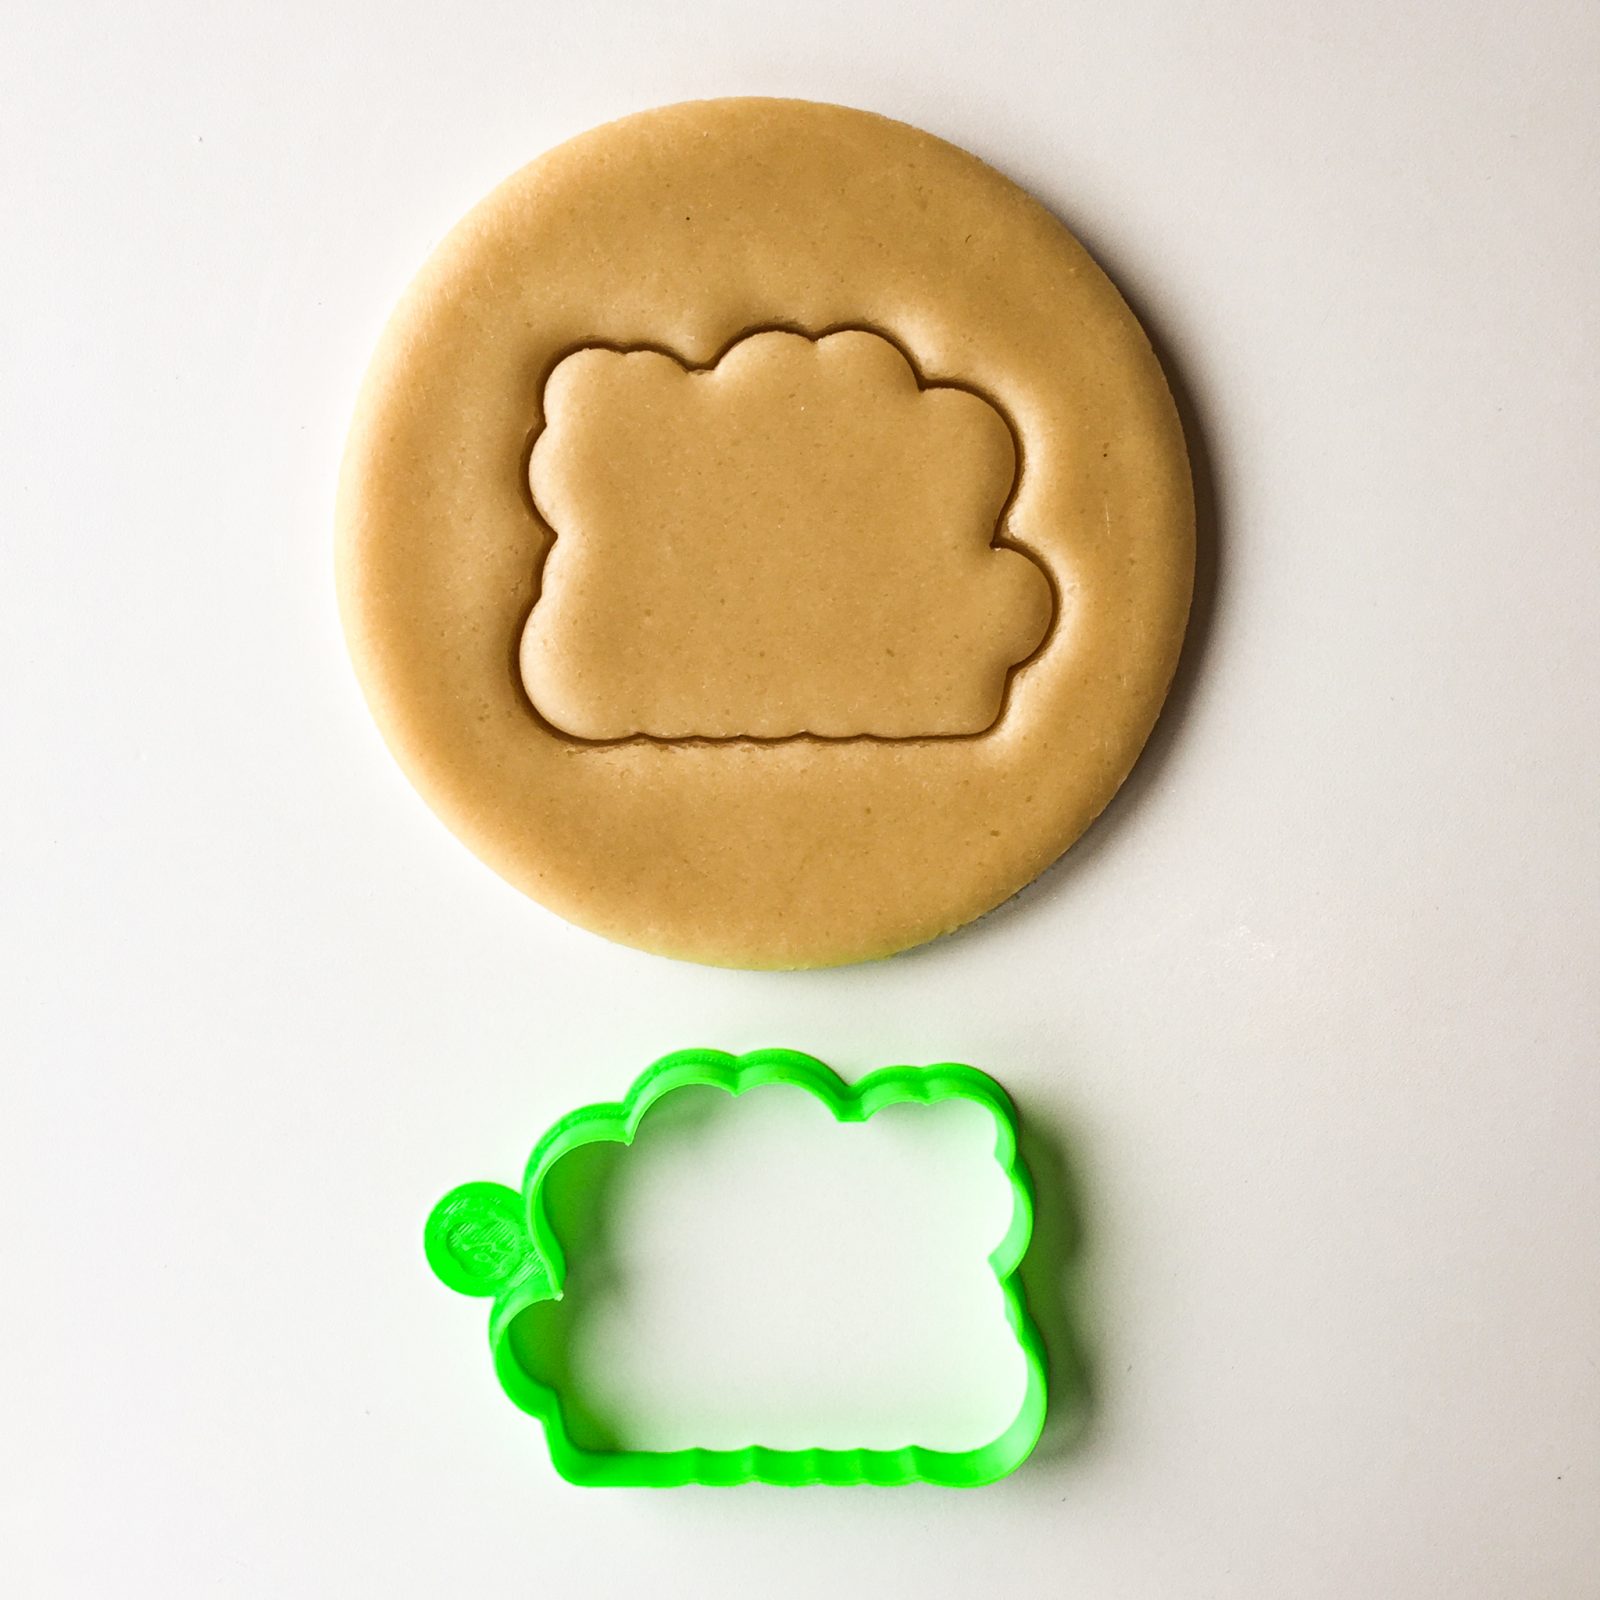 Hello Easter Cookie Cutter